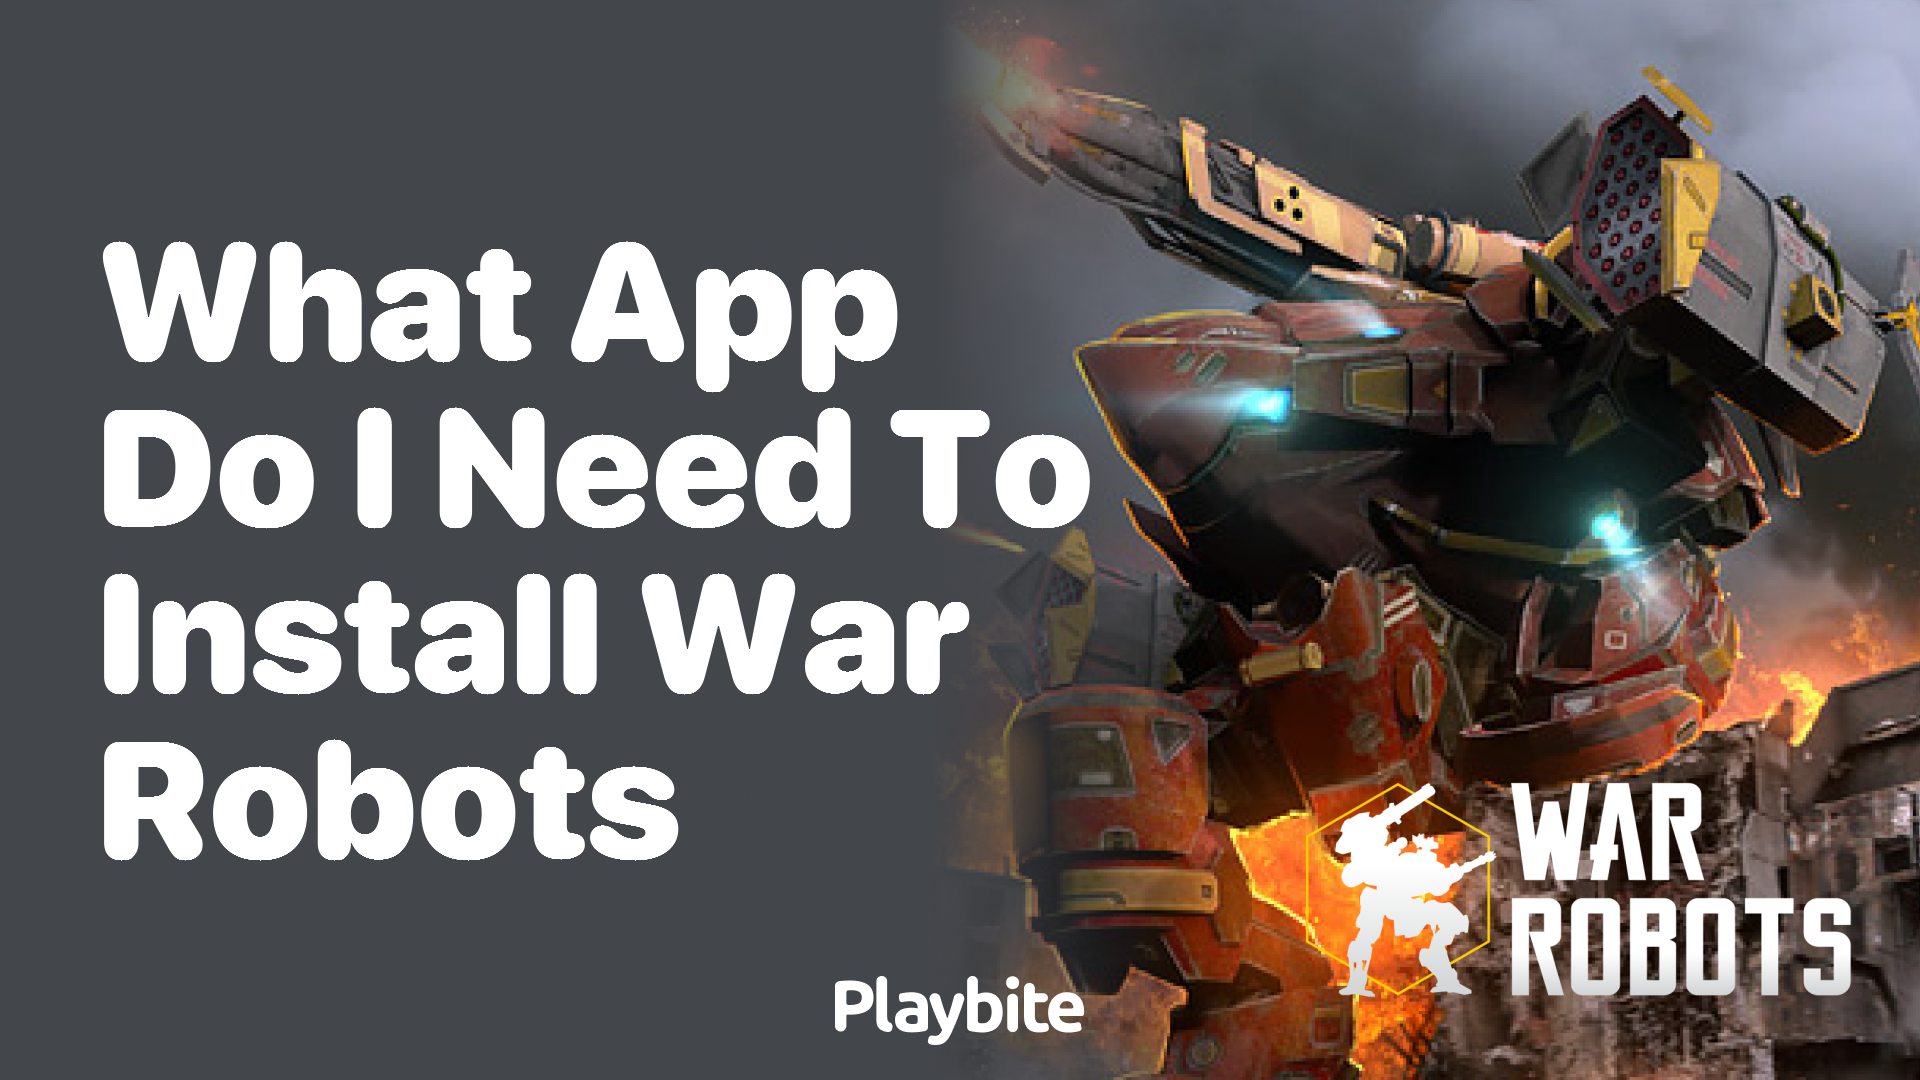 What App Do I Need to Install War Robots?